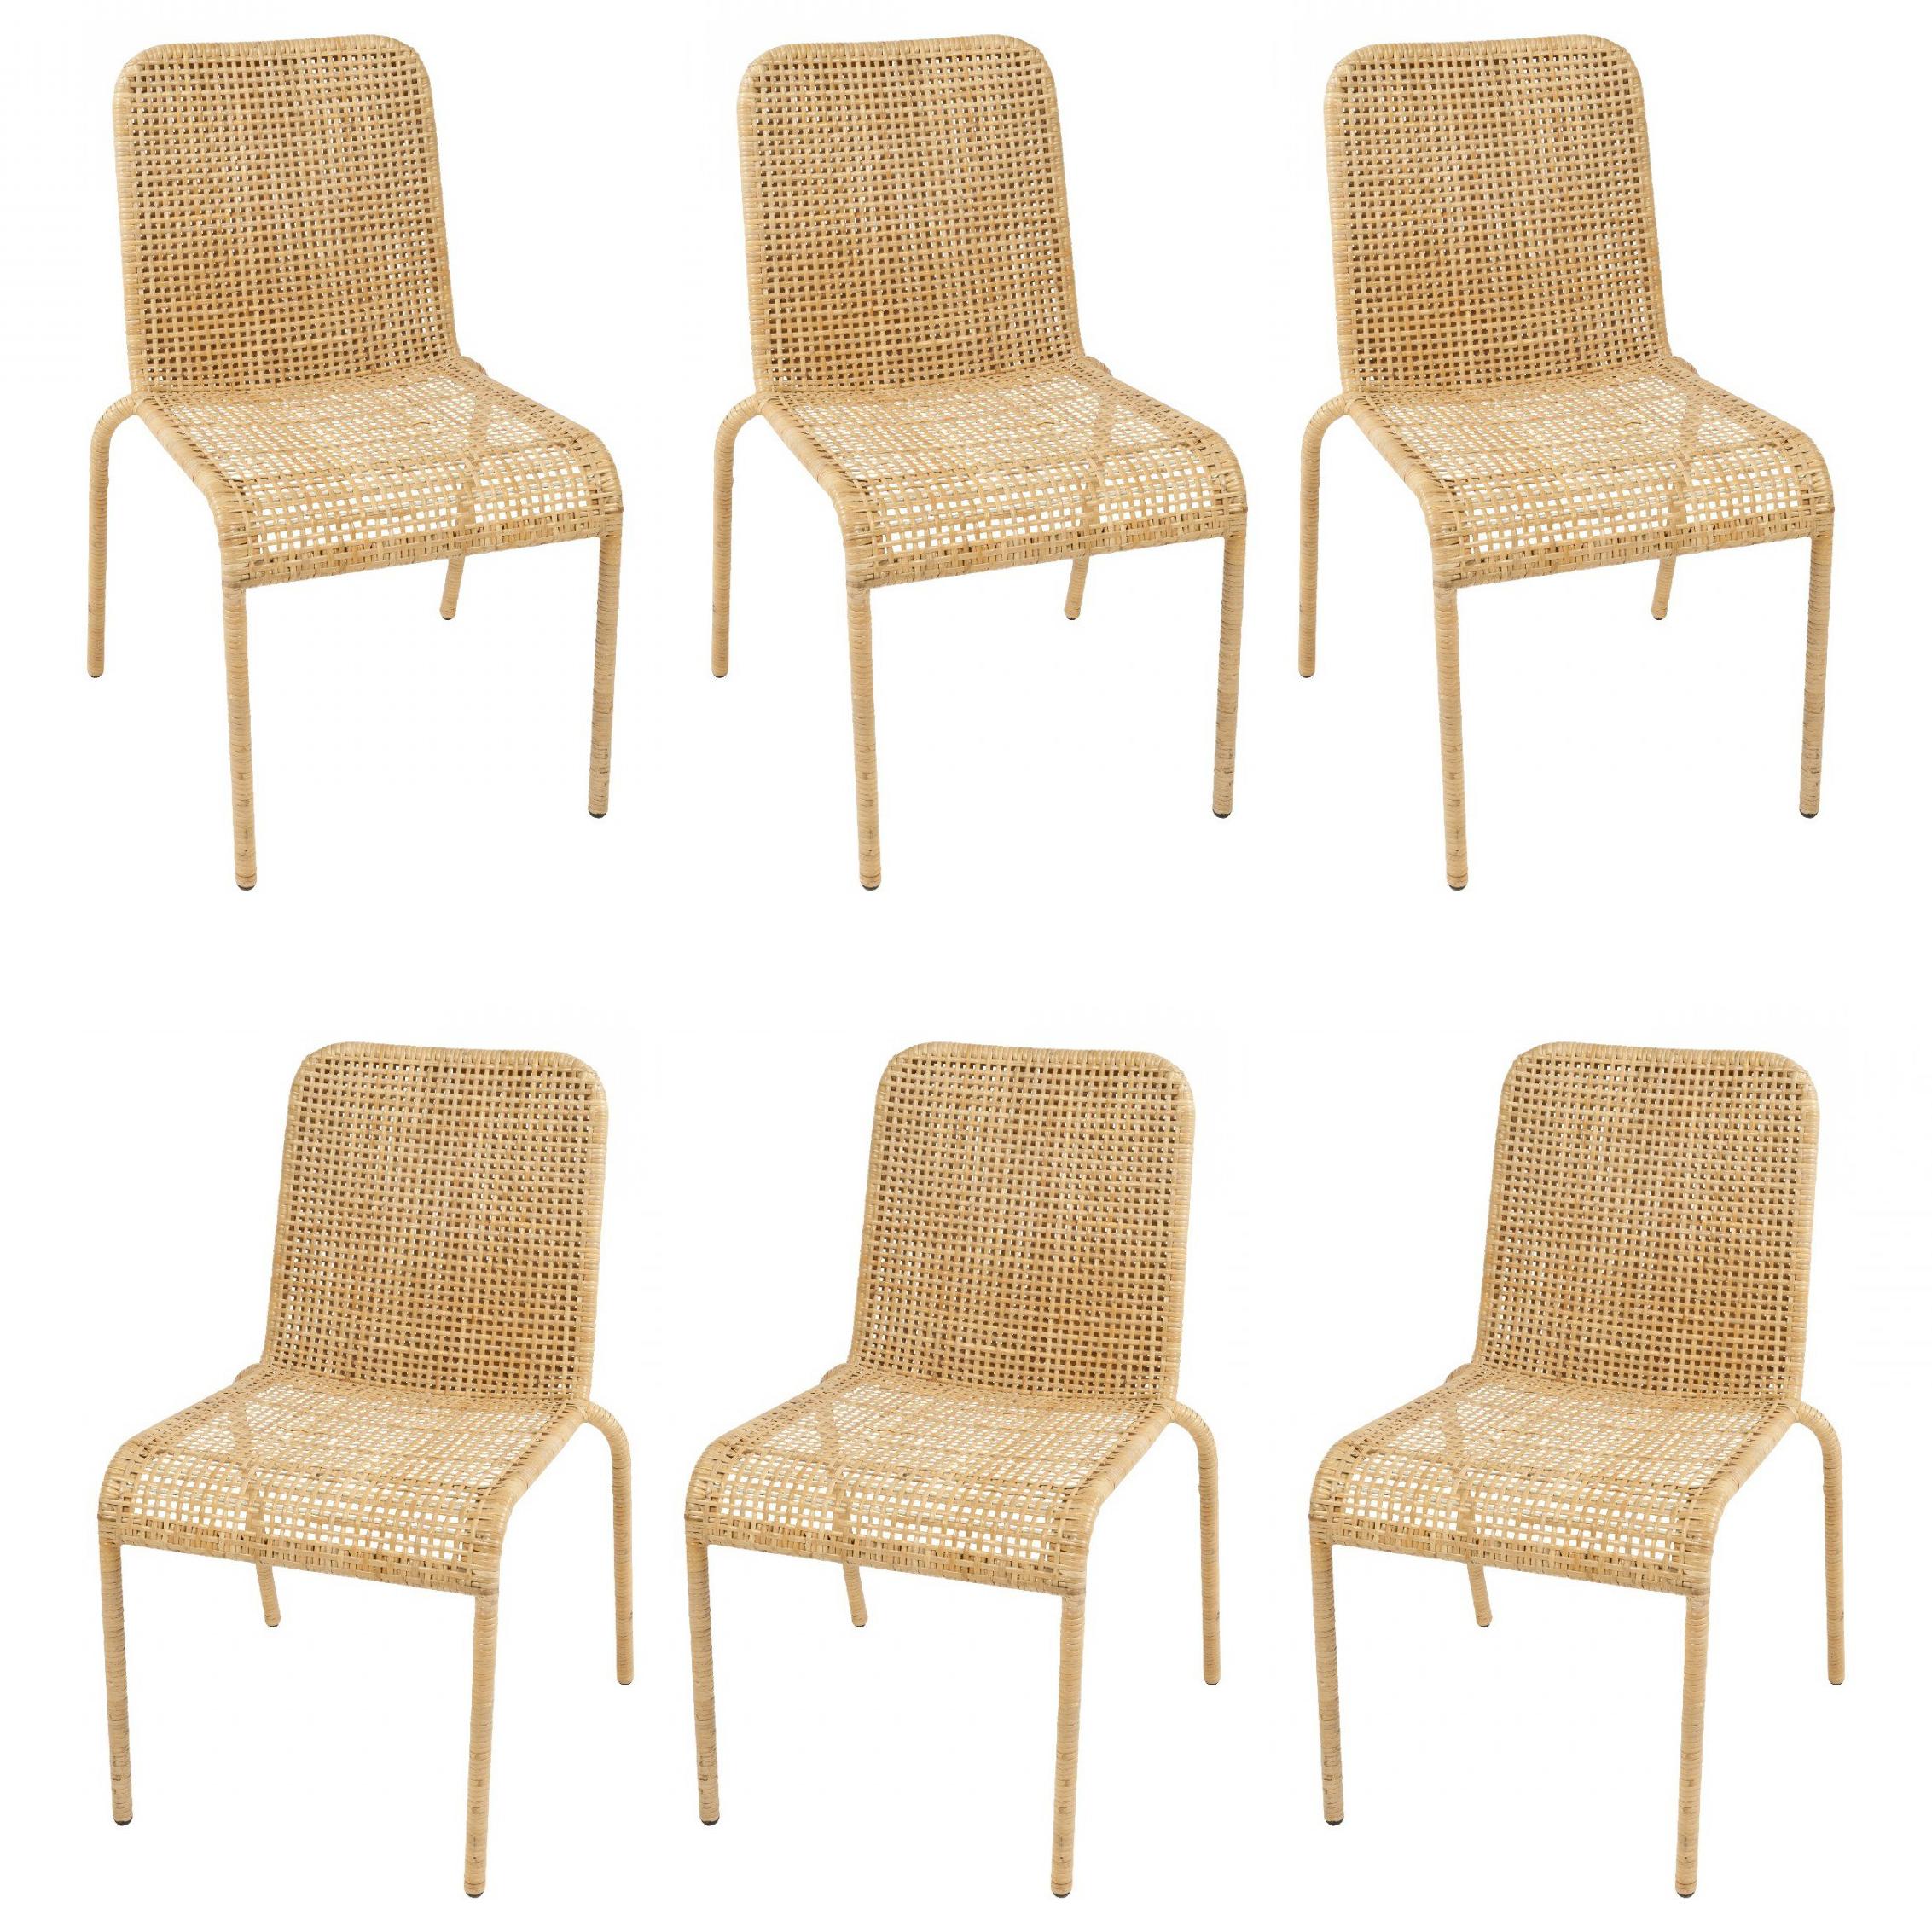 Set of Six French Design Rattan Chairs